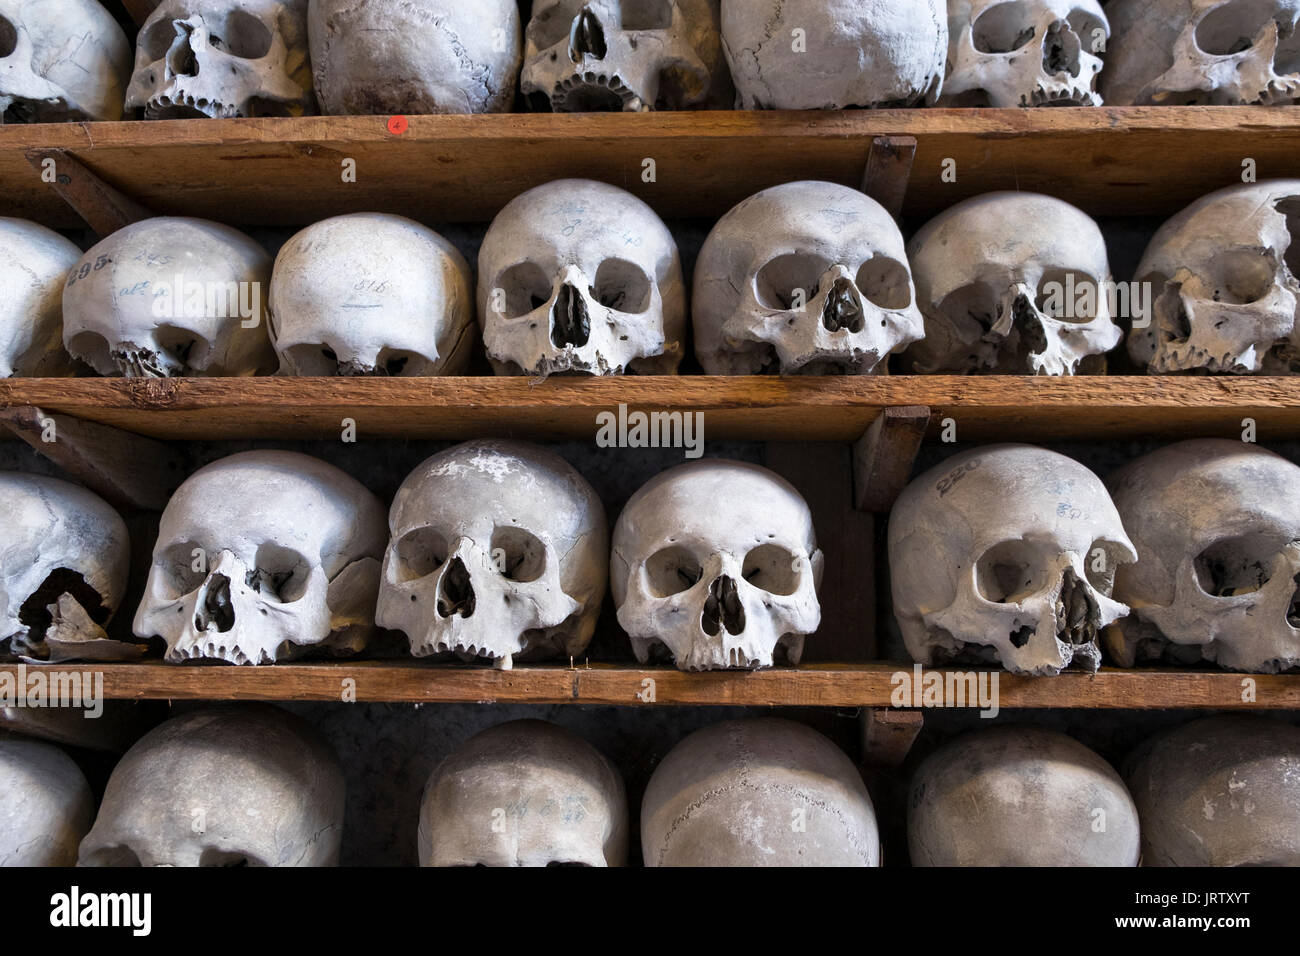 Crypt of St. Leonards church, Hythe, Kent, UK. Largest collection of ancient human bones and skulls in the uk Stock Photo